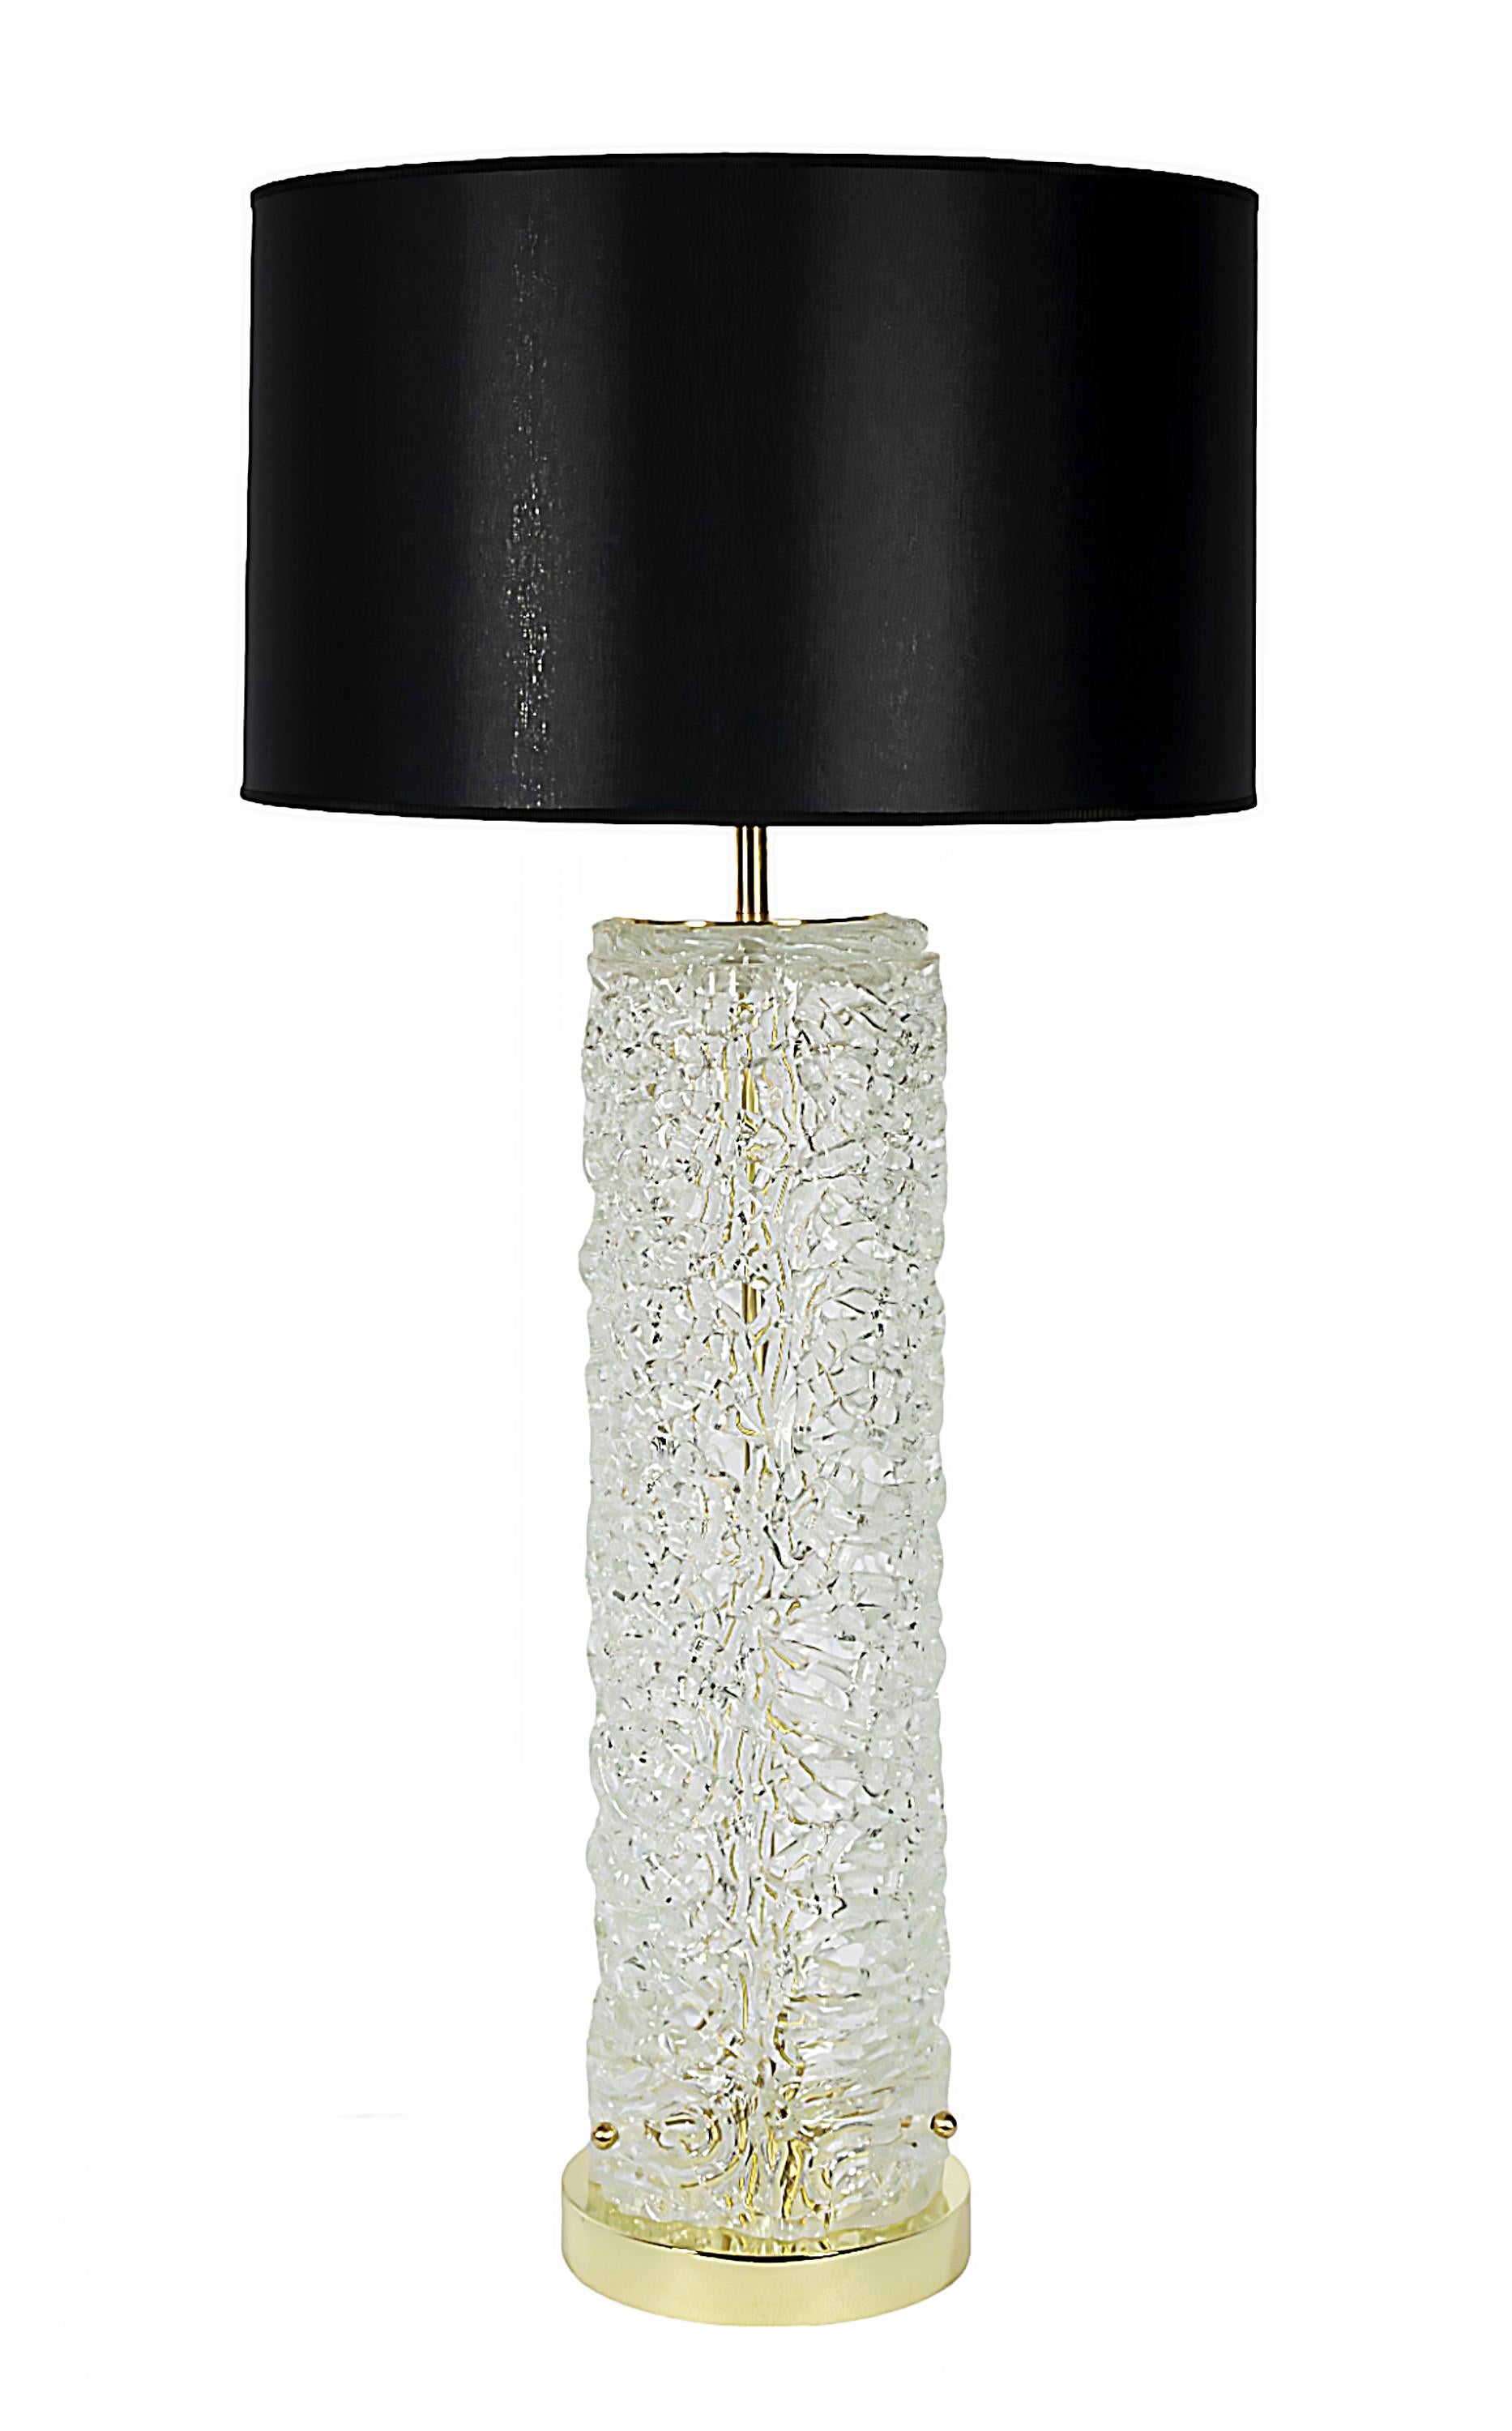 Pair of Italian table lamps made of transparent, textured and openwork Murano glass.
The base is in round brass. 
Both lamps are with new made black satin textile shades.
Dimensions: 
High 91 cm (incl. shade), shade high 27 cm, glass diameter 15